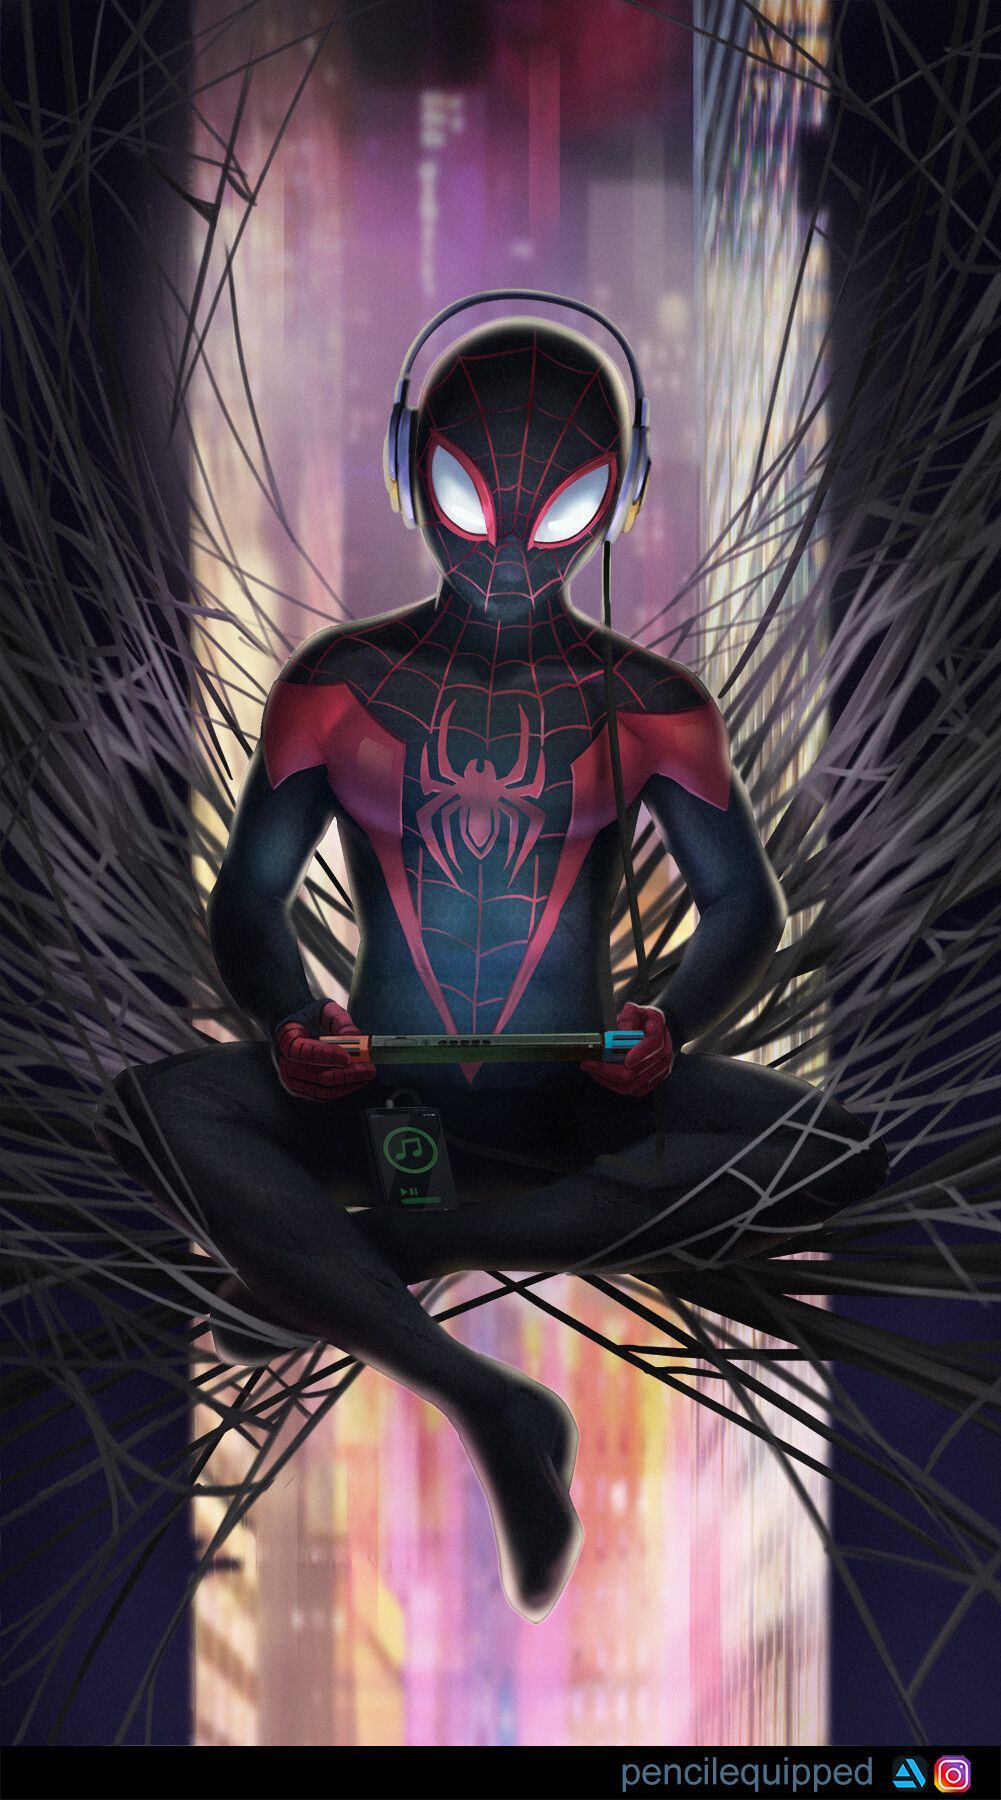 Spider Man (Miles Morales), Pencil Equipped